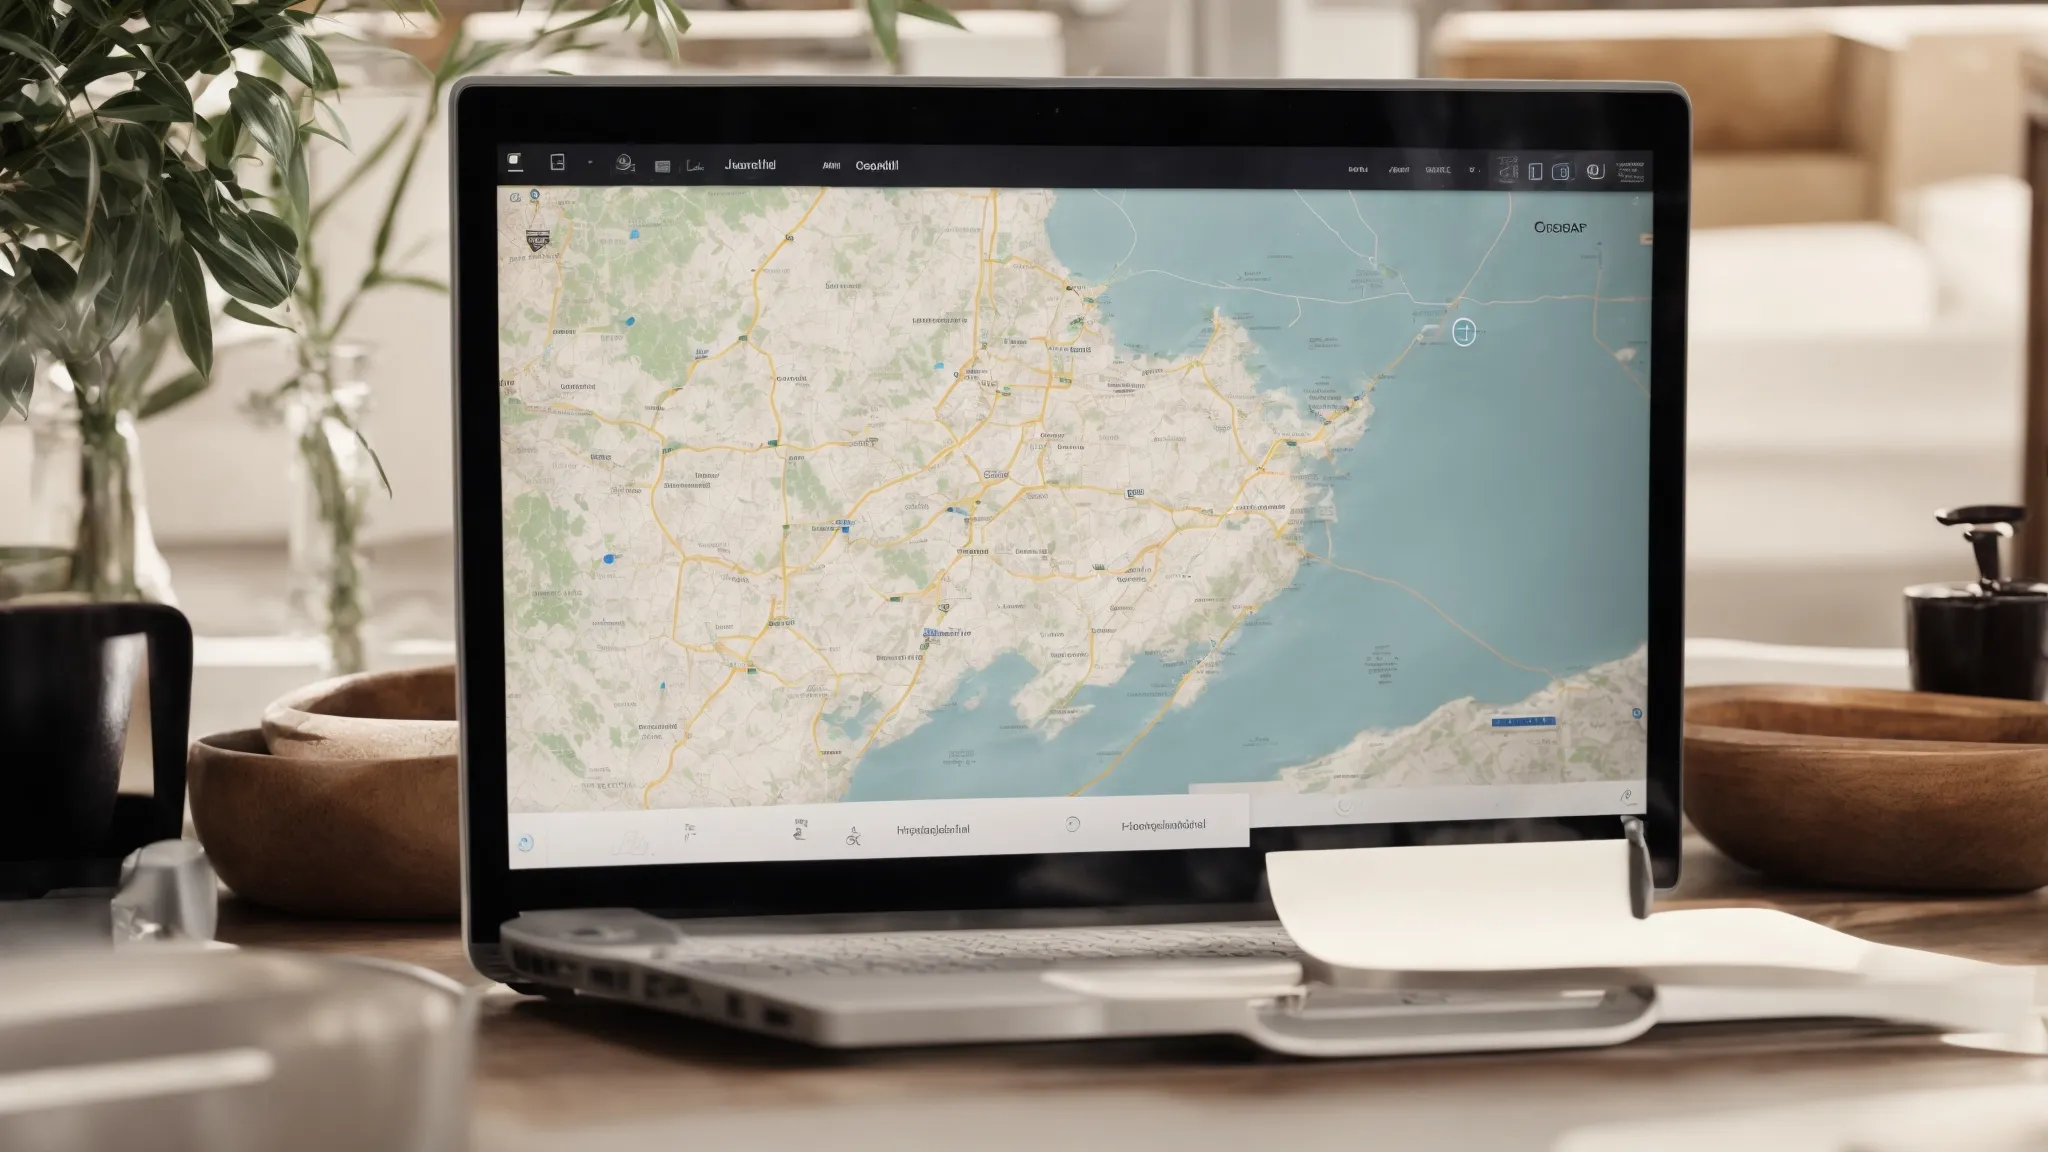 a desktop with an open laptop displaying a map and local businesses on the screen.